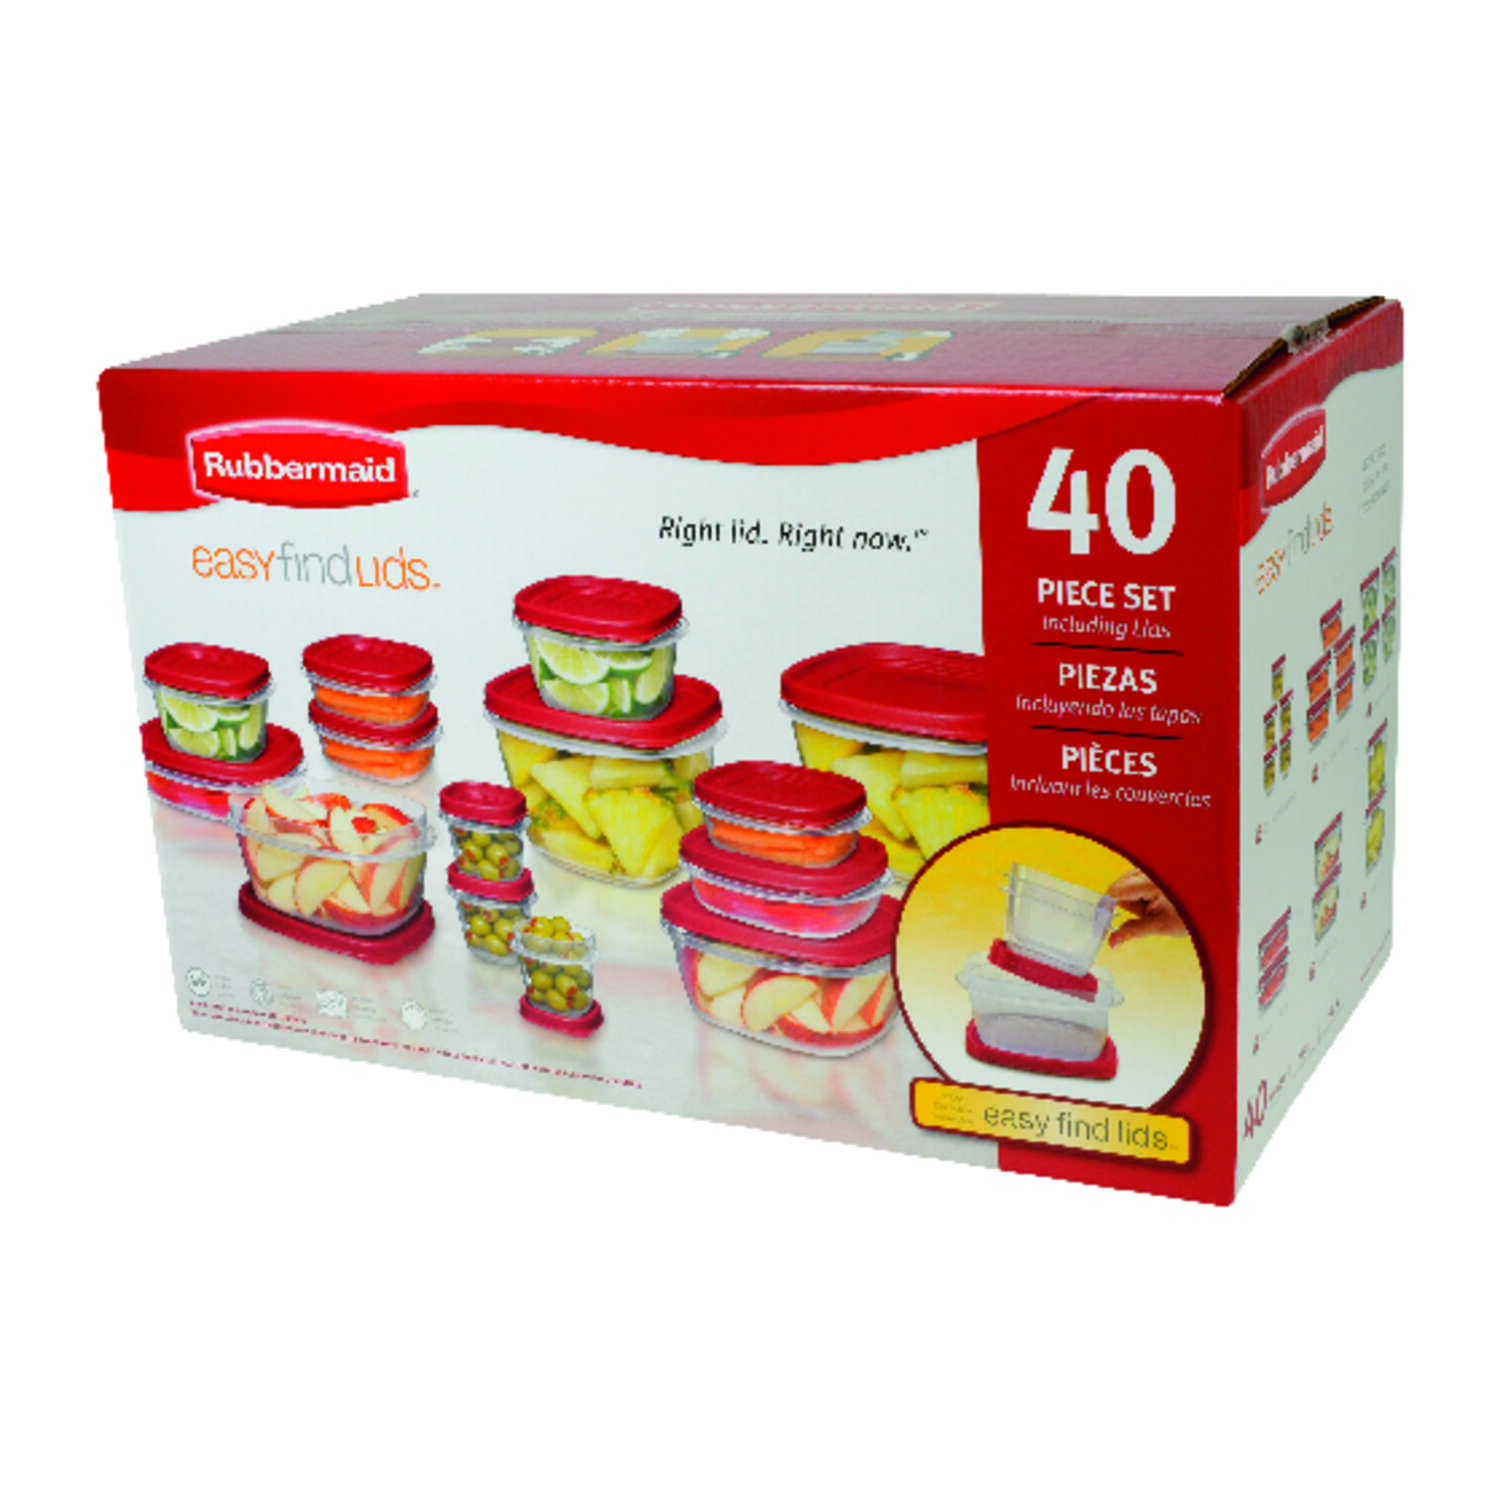 Rubbermaid 40 Piece Food Storage Set JUST $20 at Ace Hardware!